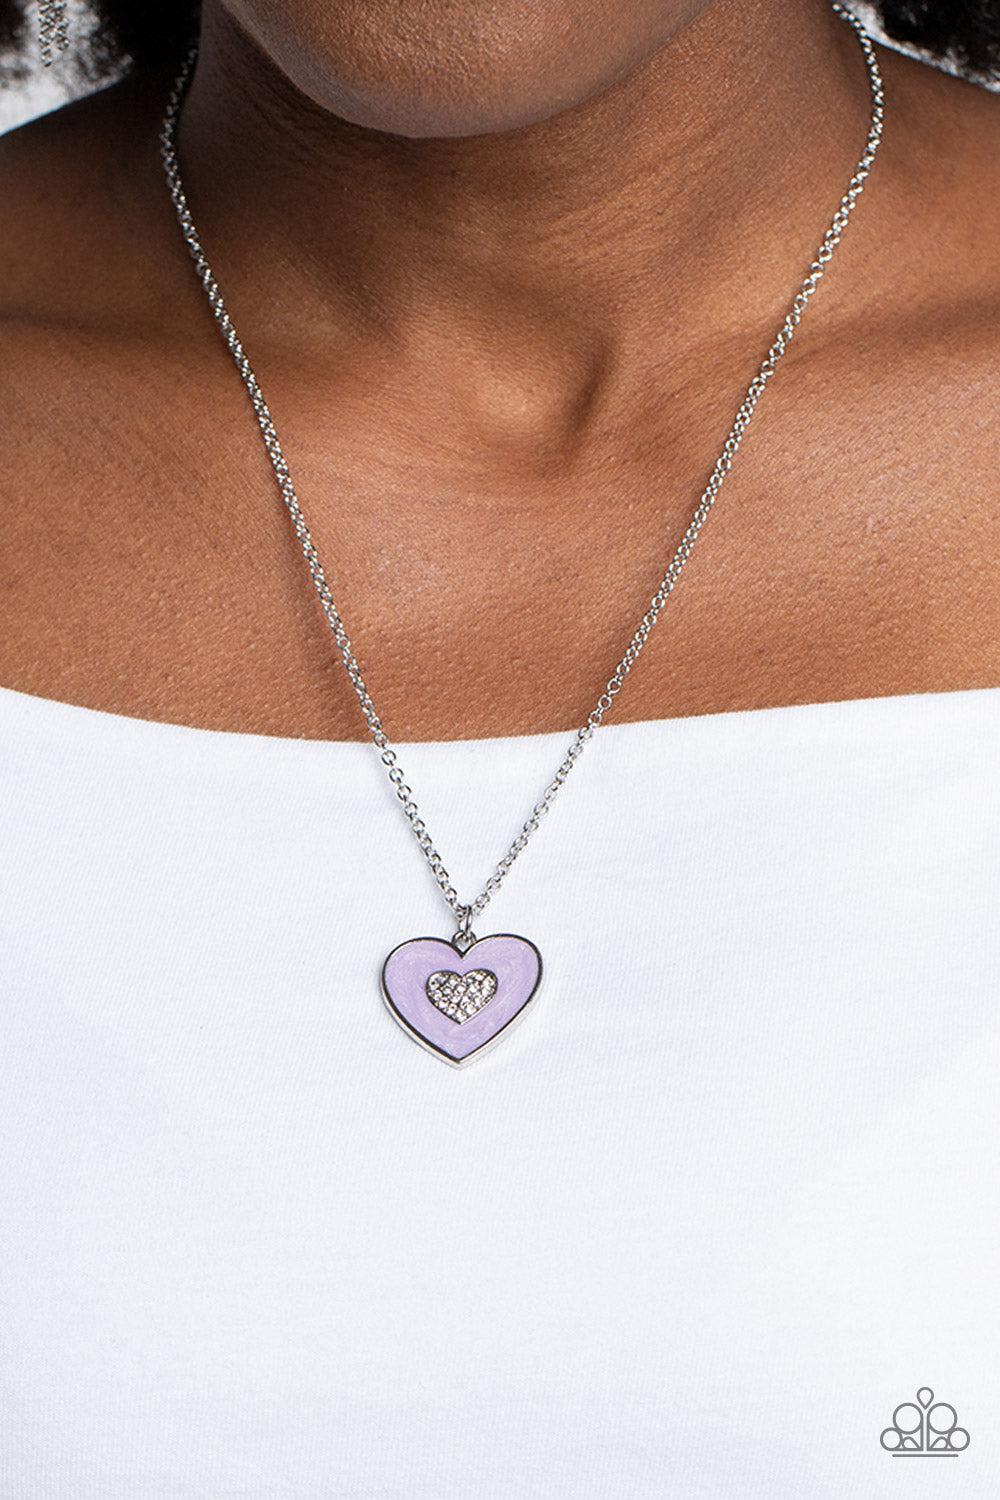 So This Is Love Purple Heart Necklace - Paparazzi Accessories-on model - CarasShop.com - $5 Jewelry by Cara Jewels